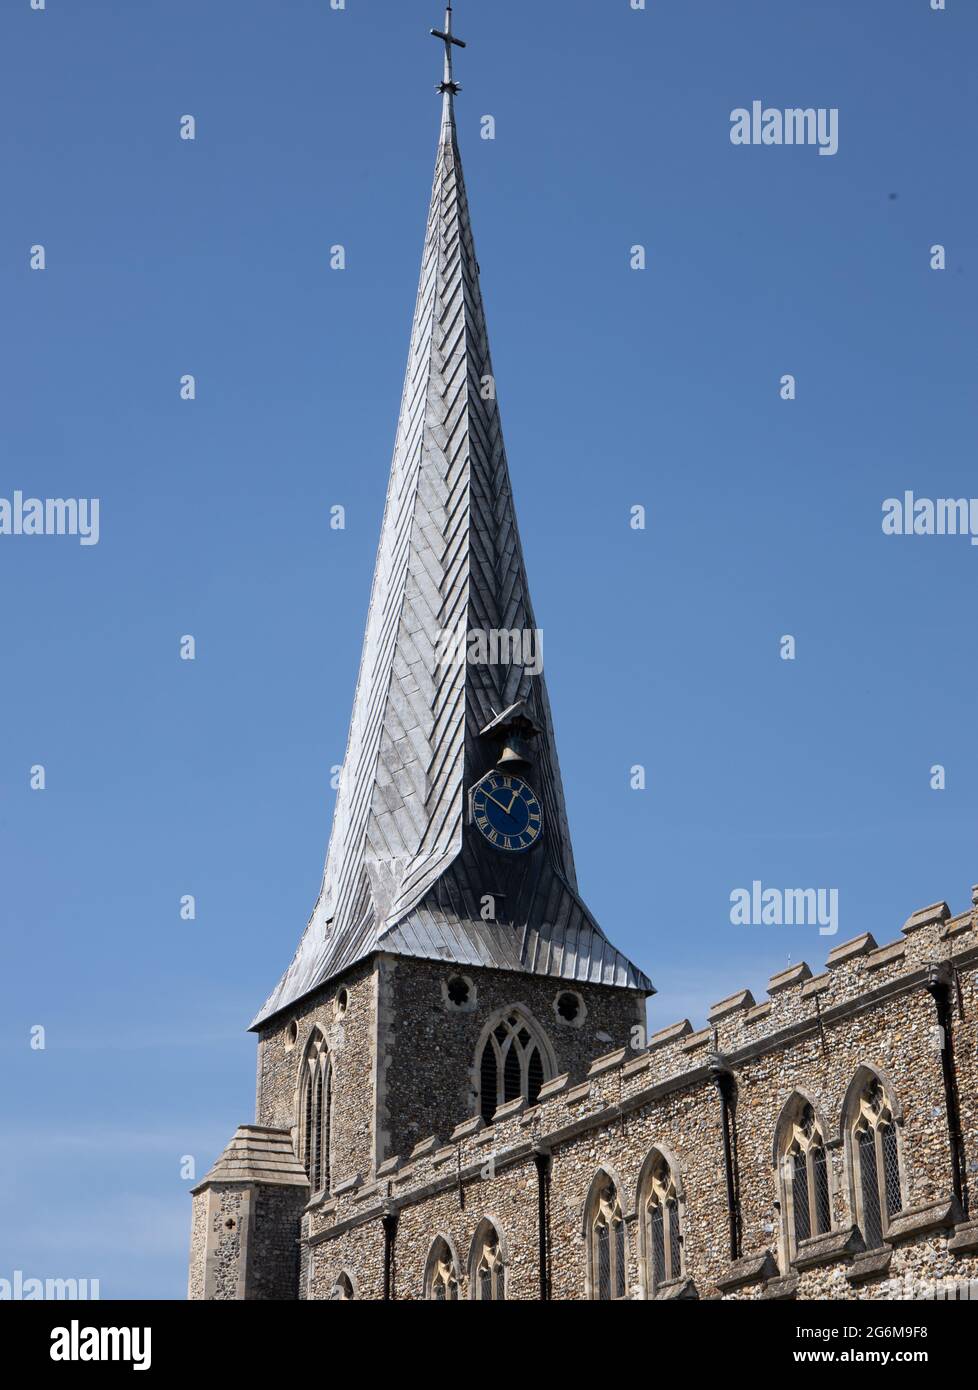 The medieval wood and lead spire, clock and bell of St Mary's church in Hadleigh, Suffolk, England Stock Photo